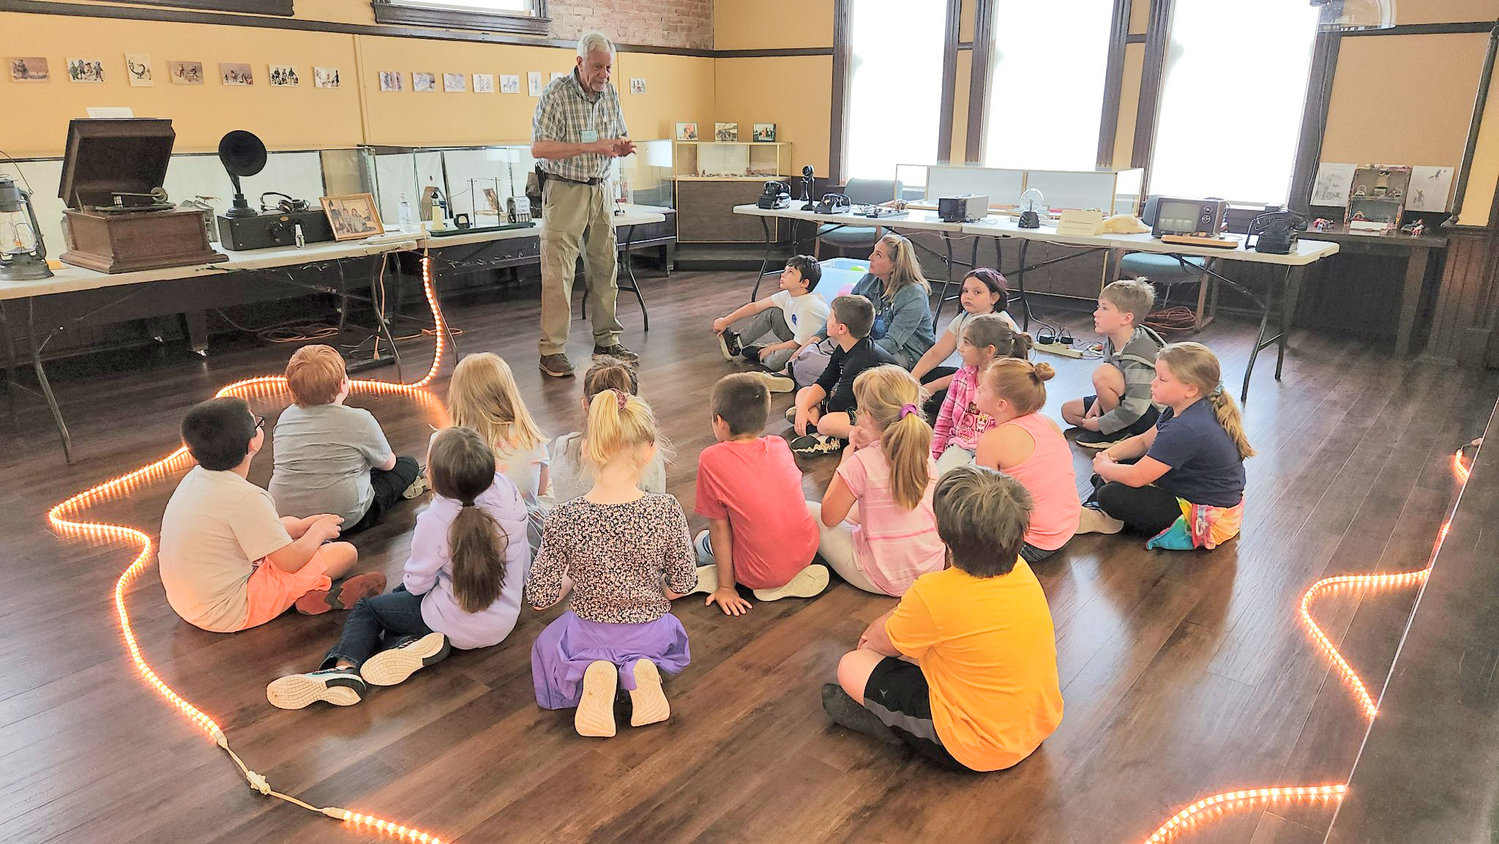 Dedicated to actively sharing local history, the Chenango County Historical Society hosts a variety of programs throughout the year, including school field trips. CCHS is raising funds to support museum operations through sales of Boscov’s “Friends Helping Friends” shopping passes, which can be used at all 50 retail locations on Oct. 19.